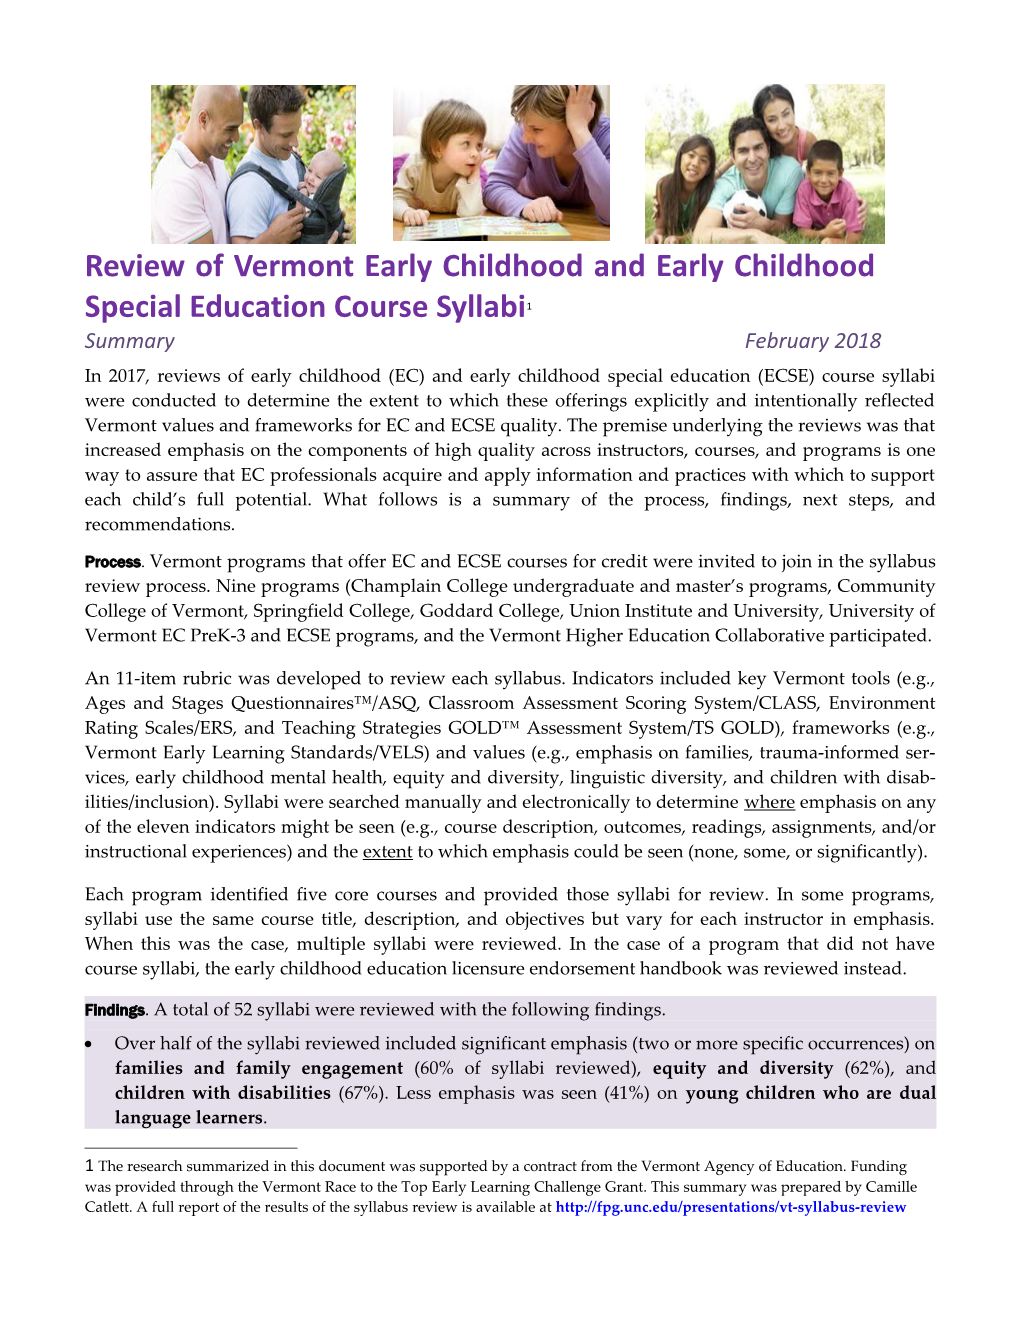 Review of Vermont Early Childhood and Early Childhood Special Education Course Syllabi 1